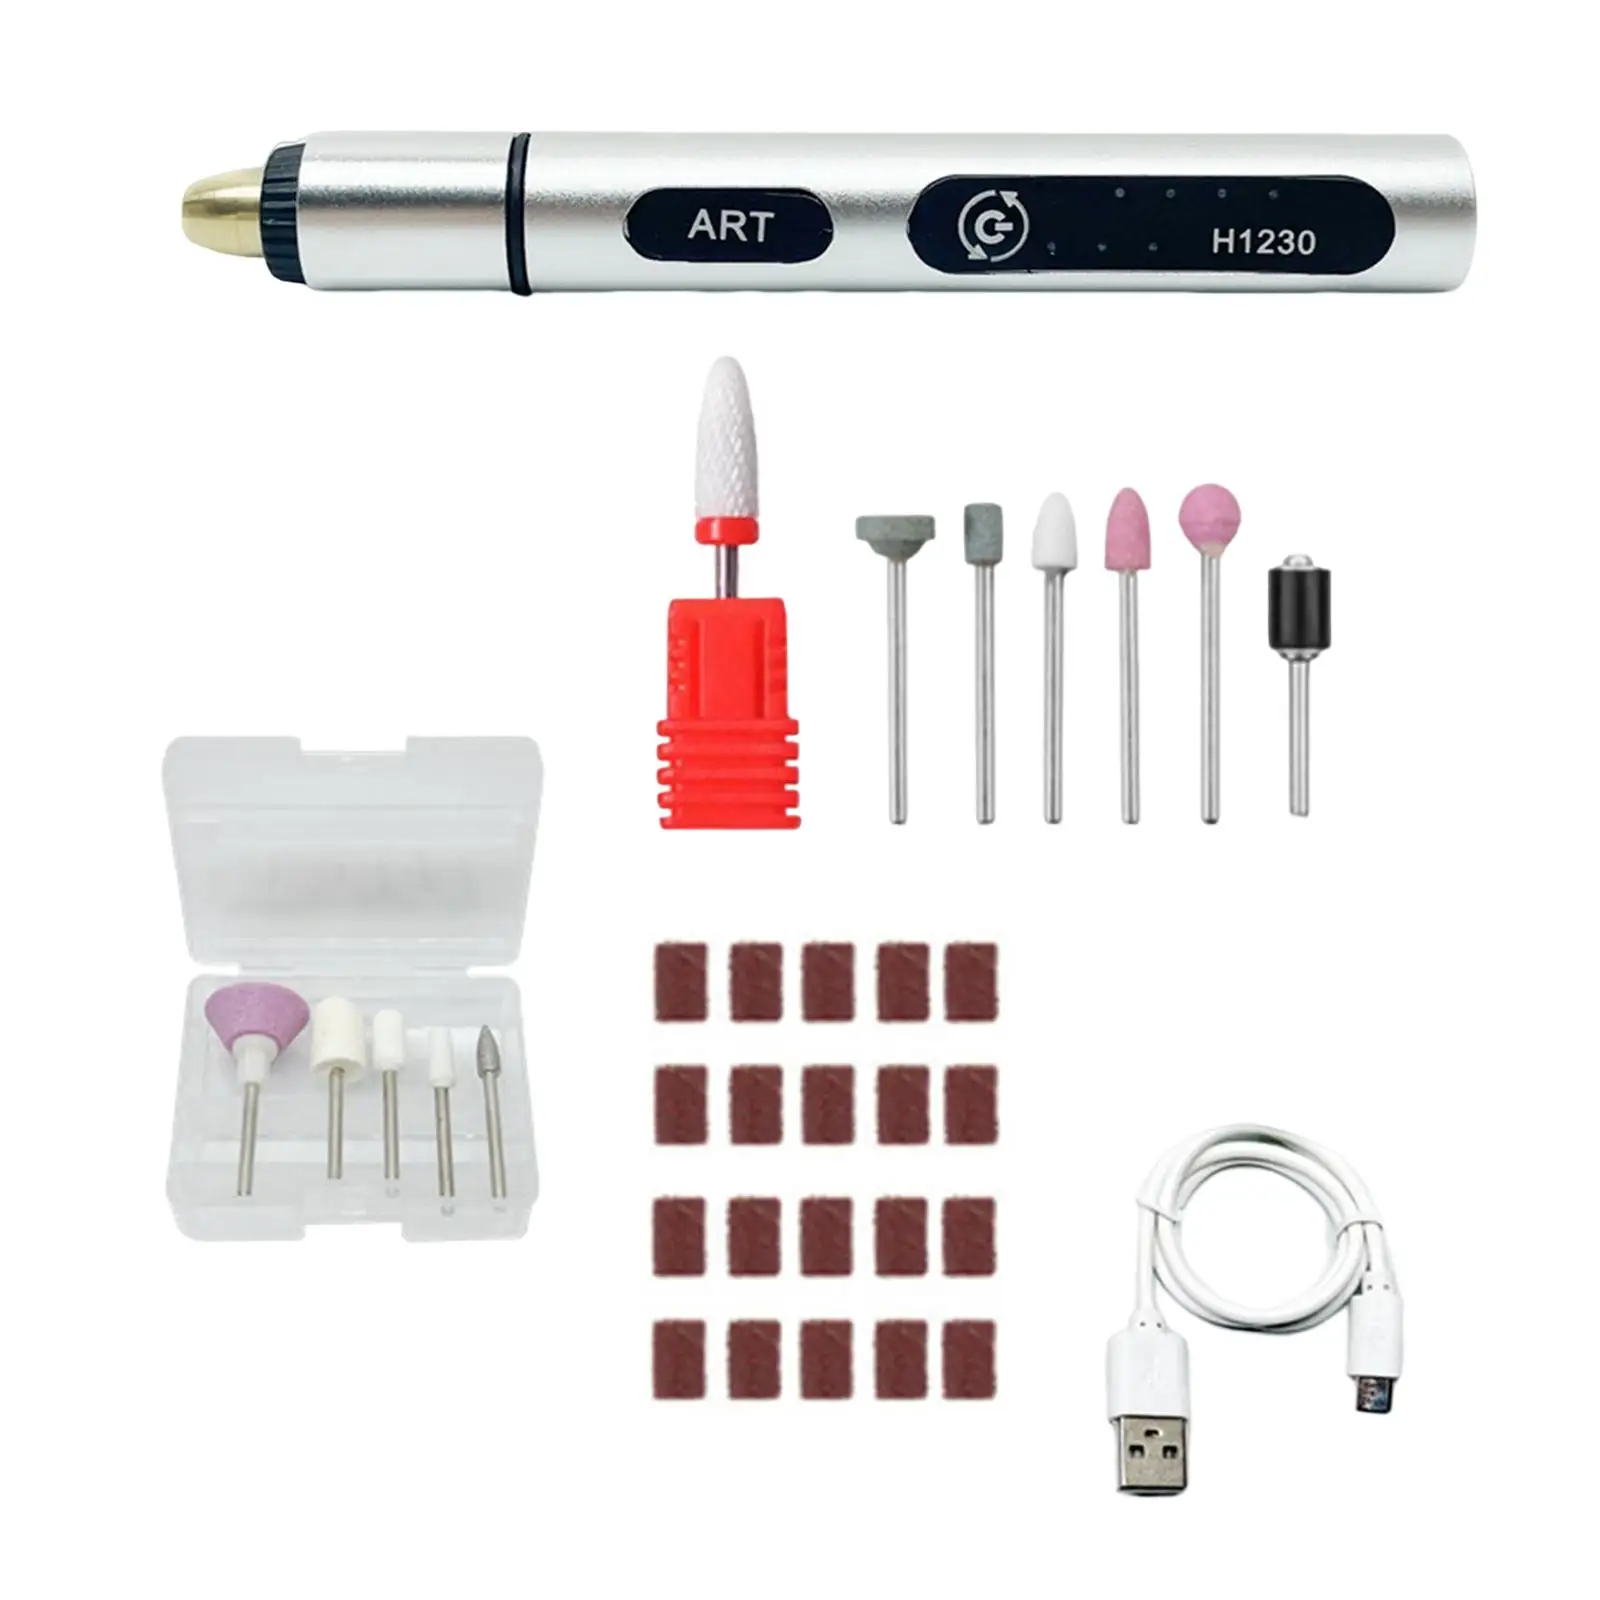 Electric Nail Drills Kit USB Charging Manicure Pedicure Pen Polisher Sander Micro Engraver Pen Accessories for Acrylic Ceramic